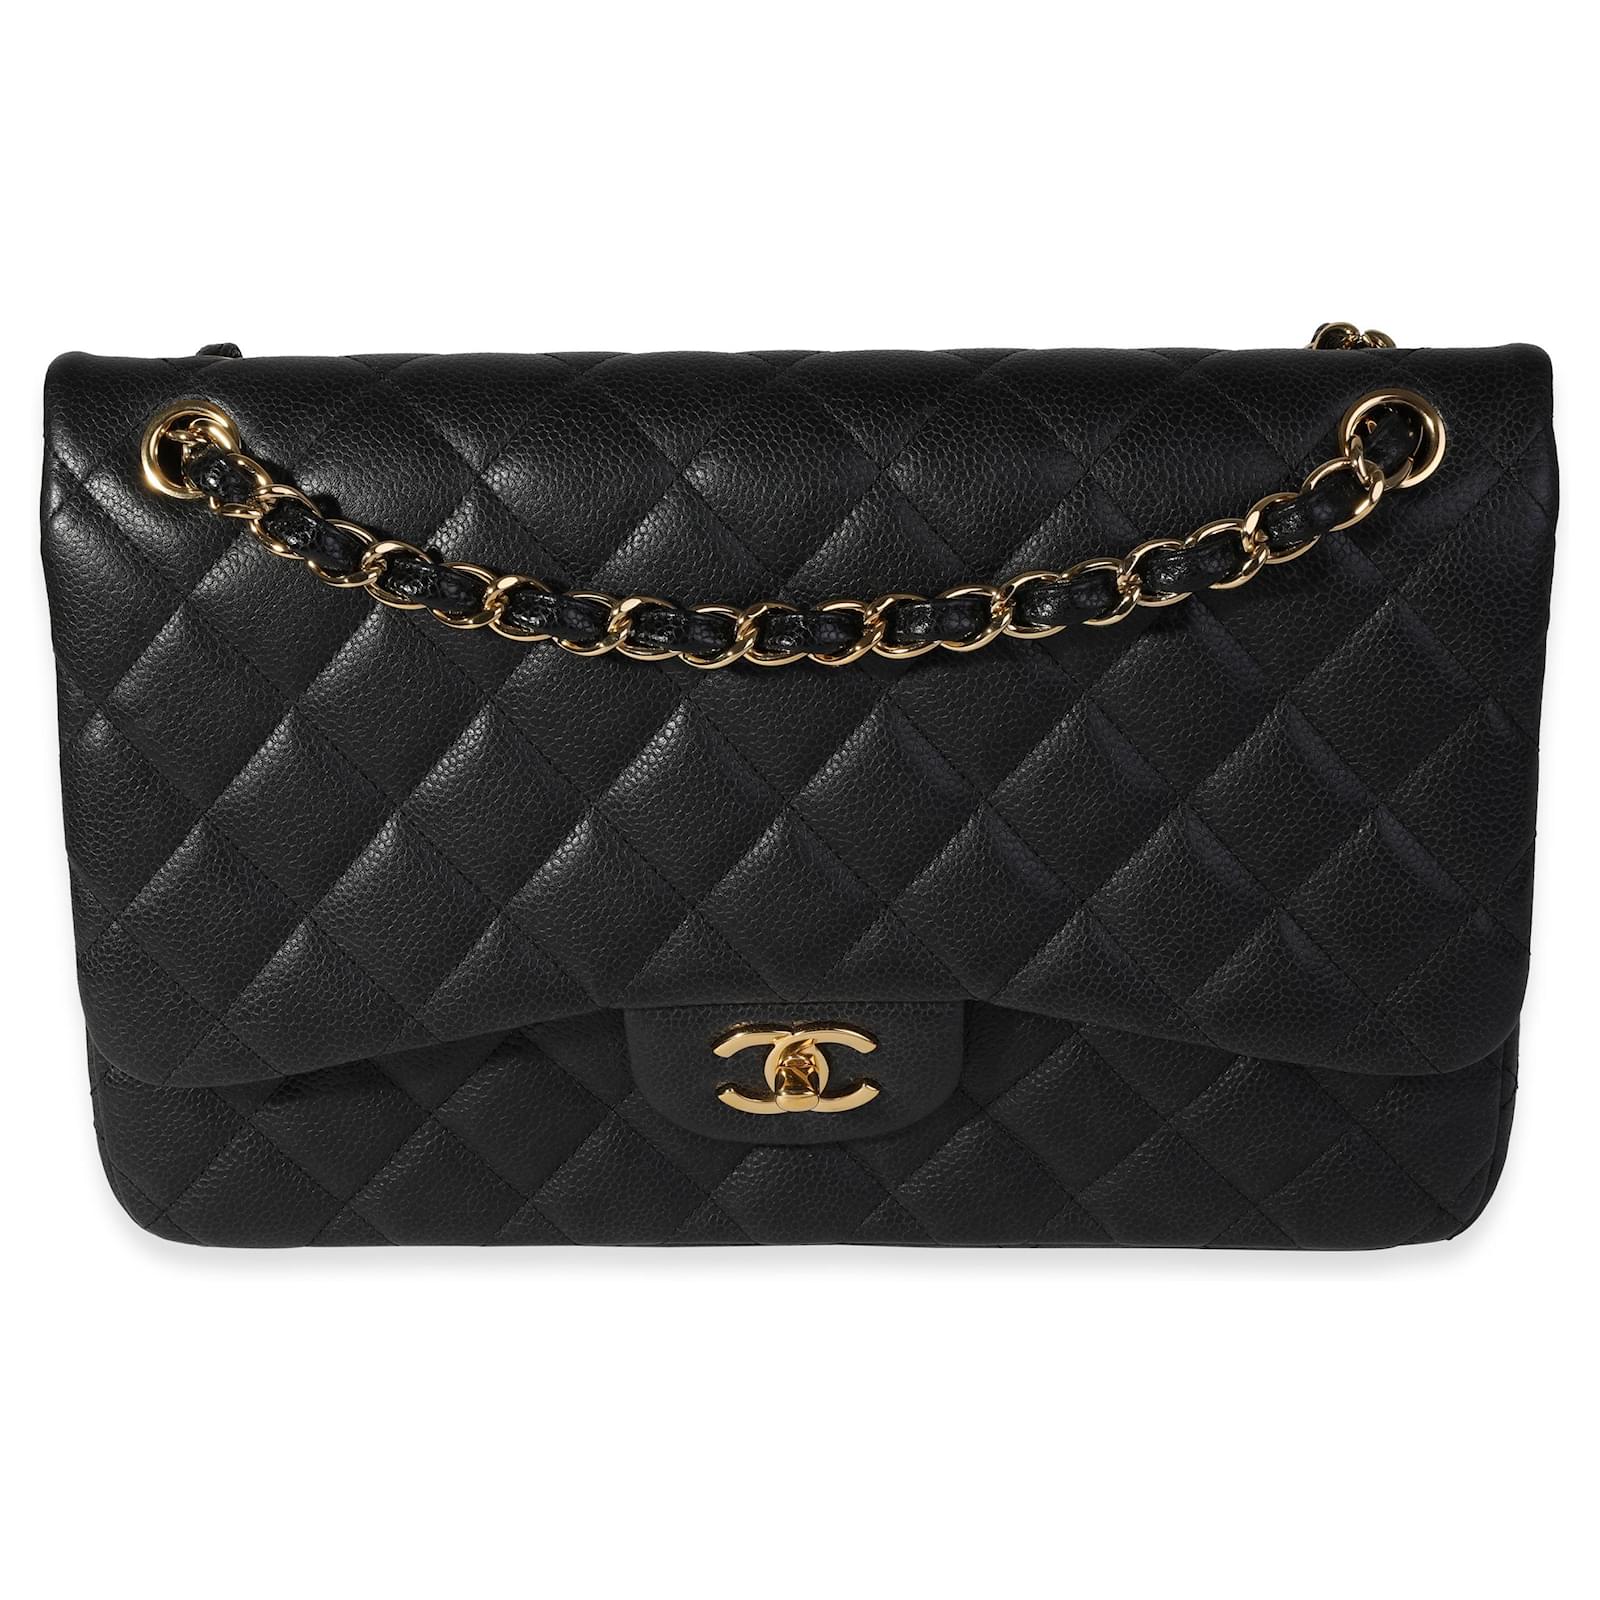 Chanel Ombre Blue Quilted Leather Maxi Classic Single Flap Shoulder Bag  Chanel | The Luxury Closet